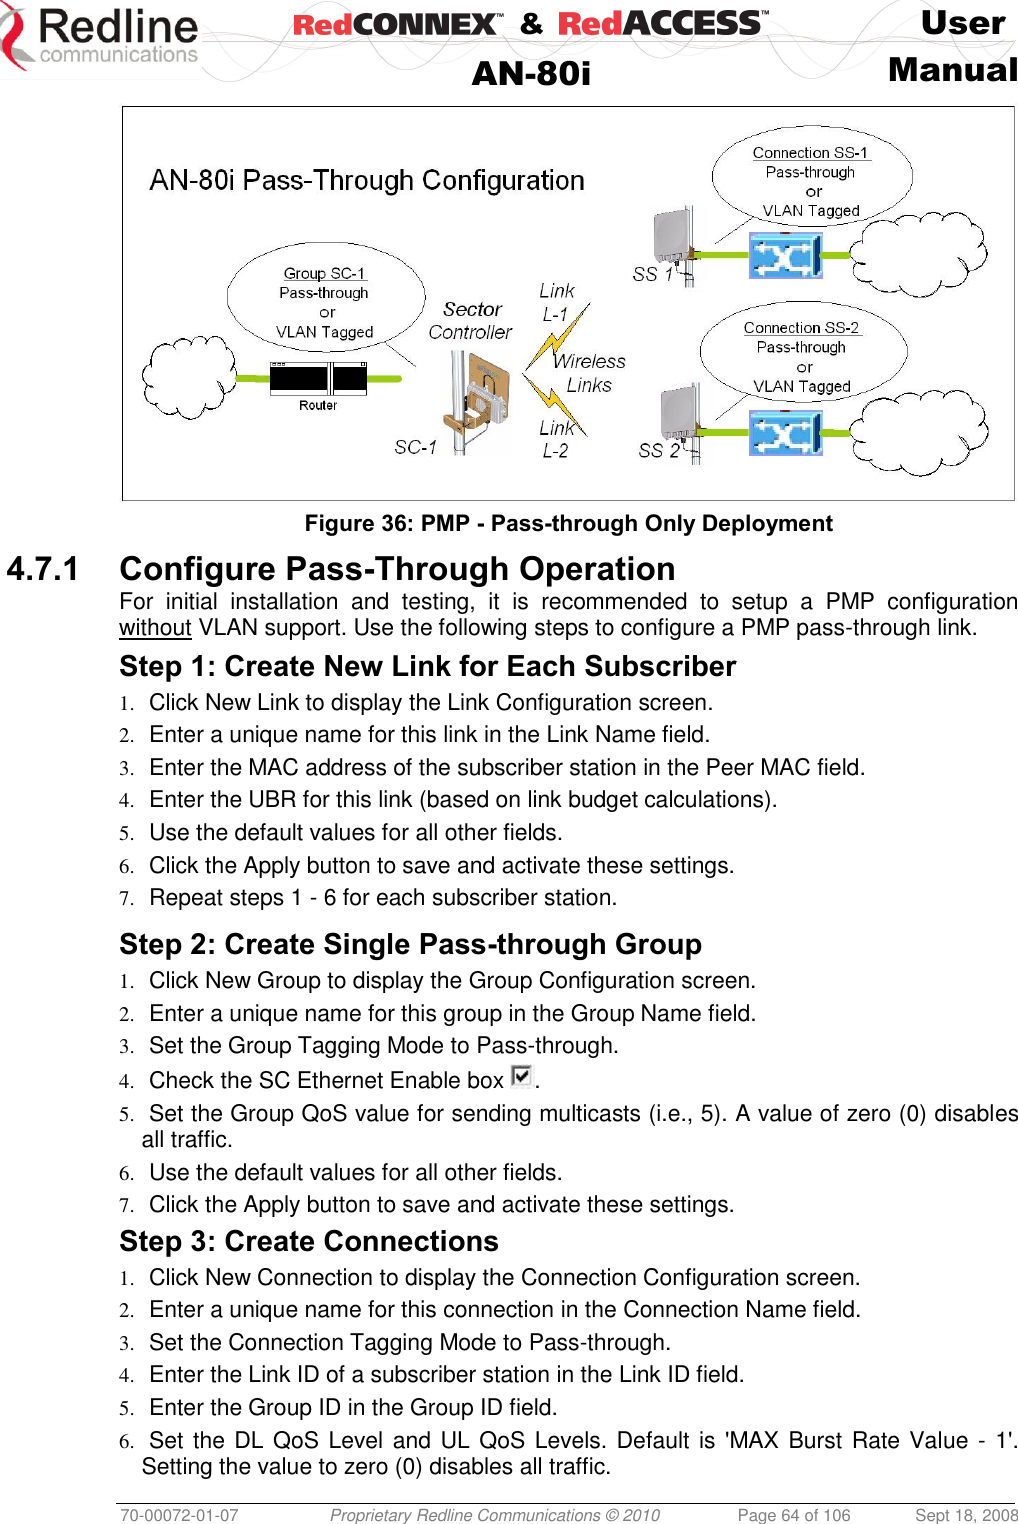    &amp;  User  AN-80i Manual  70-00072-01-07 Proprietary Redline Communications © 2010  Page 64 of 106  Sept 18, 2008  Figure 36: PMP - Pass-through Only Deployment 4.7.1 Configure Pass-Through Operation  For  initial  installation  and  testing,  it  is  recommended  to  setup  a  PMP  configuration without VLAN support. Use the following steps to configure a PMP pass-through link. Step 1: Create New Link for Each Subscriber 1. Click New Link to display the Link Configuration screen. 2. Enter a unique name for this link in the Link Name field. 3. Enter the MAC address of the subscriber station in the Peer MAC field. 4. Enter the UBR for this link (based on link budget calculations). 5. Use the default values for all other fields. 6. Click the Apply button to save and activate these settings. 7. Repeat steps 1 - 6 for each subscriber station.  Step 2: Create Single Pass-through Group 1. Click New Group to display the Group Configuration screen. 2. Enter a unique name for this group in the Group Name field.  3. Set the Group Tagging Mode to Pass-through. 4. Check the SC Ethernet Enable box  . 5. Set the Group QoS value for sending multicasts (i.e., 5). A value of zero (0) disables all traffic. 6. Use the default values for all other fields. 7. Click the Apply button to save and activate these settings. Step 3: Create Connections 1. Click New Connection to display the Connection Configuration screen. 2. Enter a unique name for this connection in the Connection Name field. 3. Set the Connection Tagging Mode to Pass-through. 4. Enter the Link ID of a subscriber station in the Link ID field. 5. Enter the Group ID in the Group ID field. 6. Set the DL QoS Level and UL QoS Levels. Default is &apos;MAX Burst Rate Value - 1&apos;. Setting the value to zero (0) disables all traffic. 